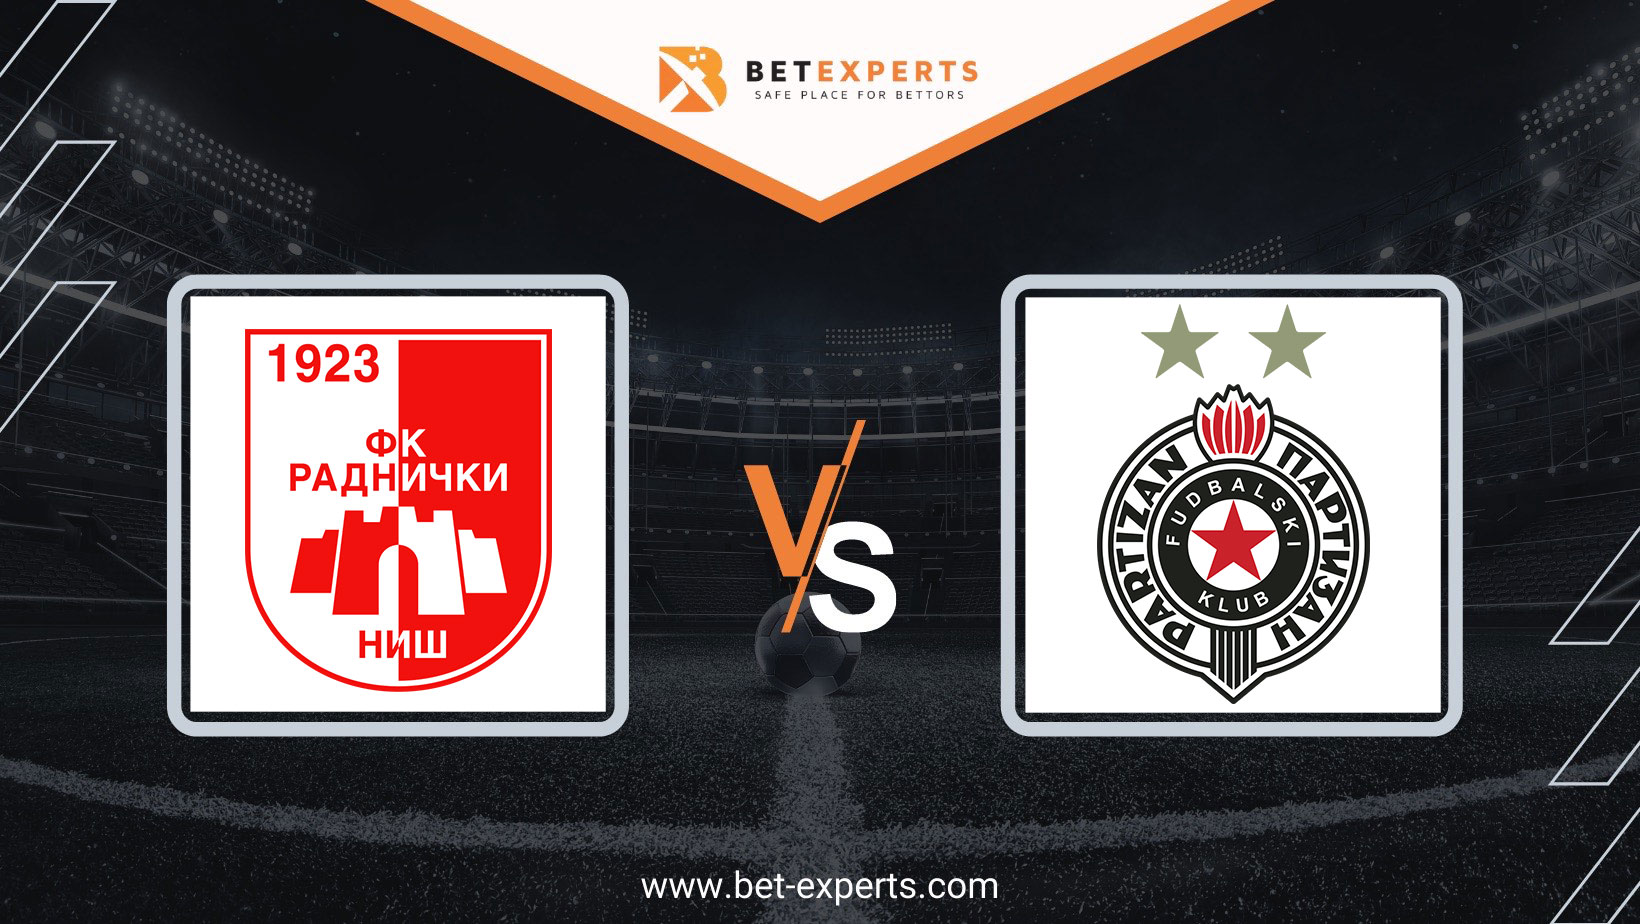 Radnicki Nis vs Proleter - live score, predicted lineups and H2H